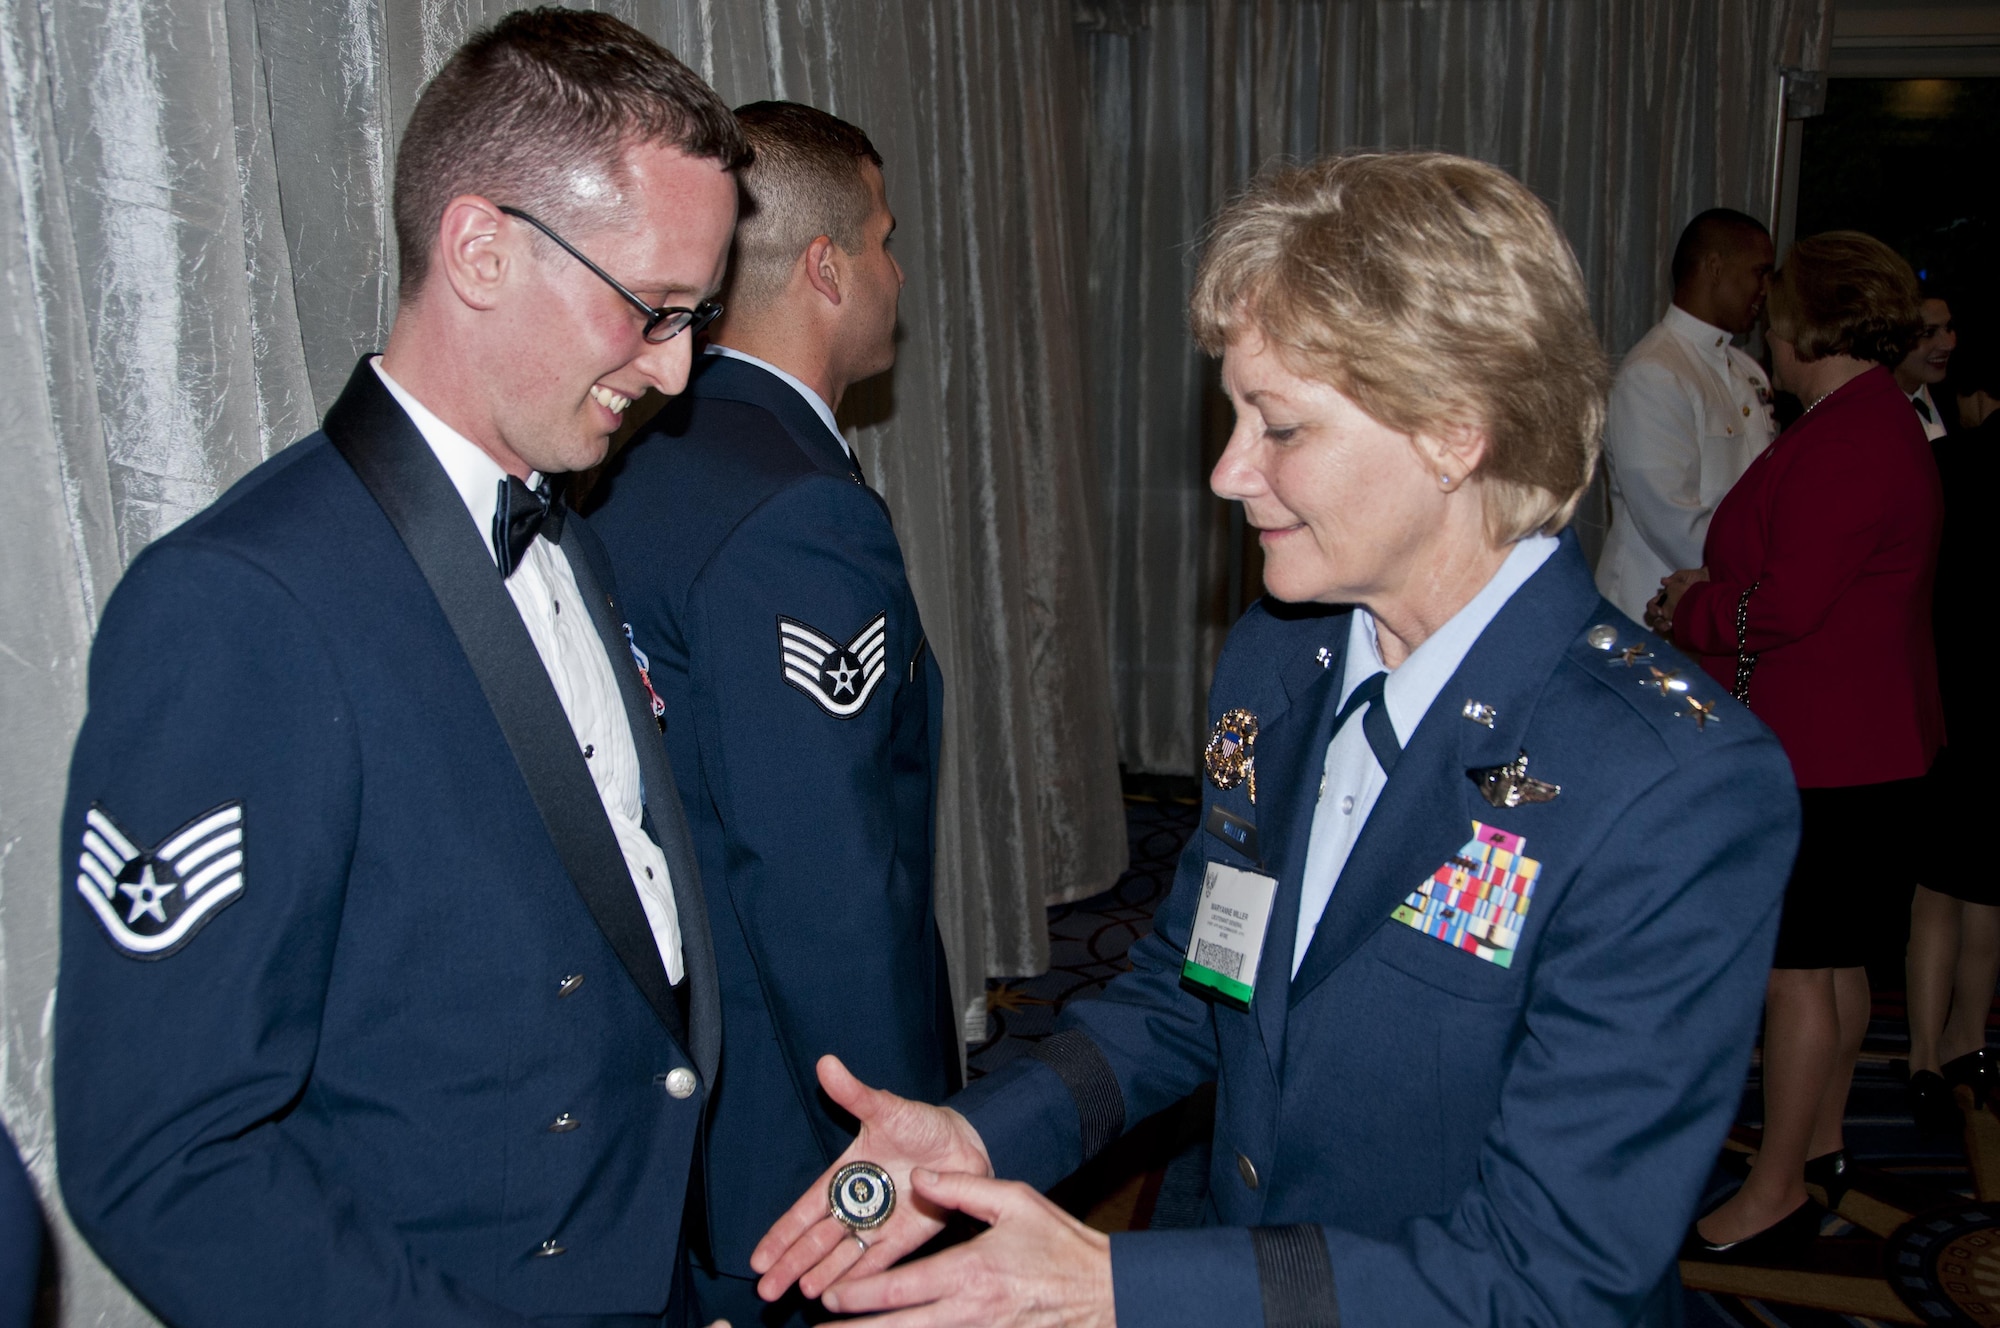 Lt. Gen. Maryanne Miller, chief of the Air Force Reserve and commander, Air Force Reserve Command, presents Staff Sgt. Aaron Tobler with a Chief of the Air Force Reserve coin during the Air Force Association banquet recognizing the Air Force's 12 Outstanding Airmen of the Year in Washington, D.C., Sept. 19, 2016. Tobler is a geospatial intelligence analyst with the 50th Intelligence Squadron, Beale Air Force Base, California.
